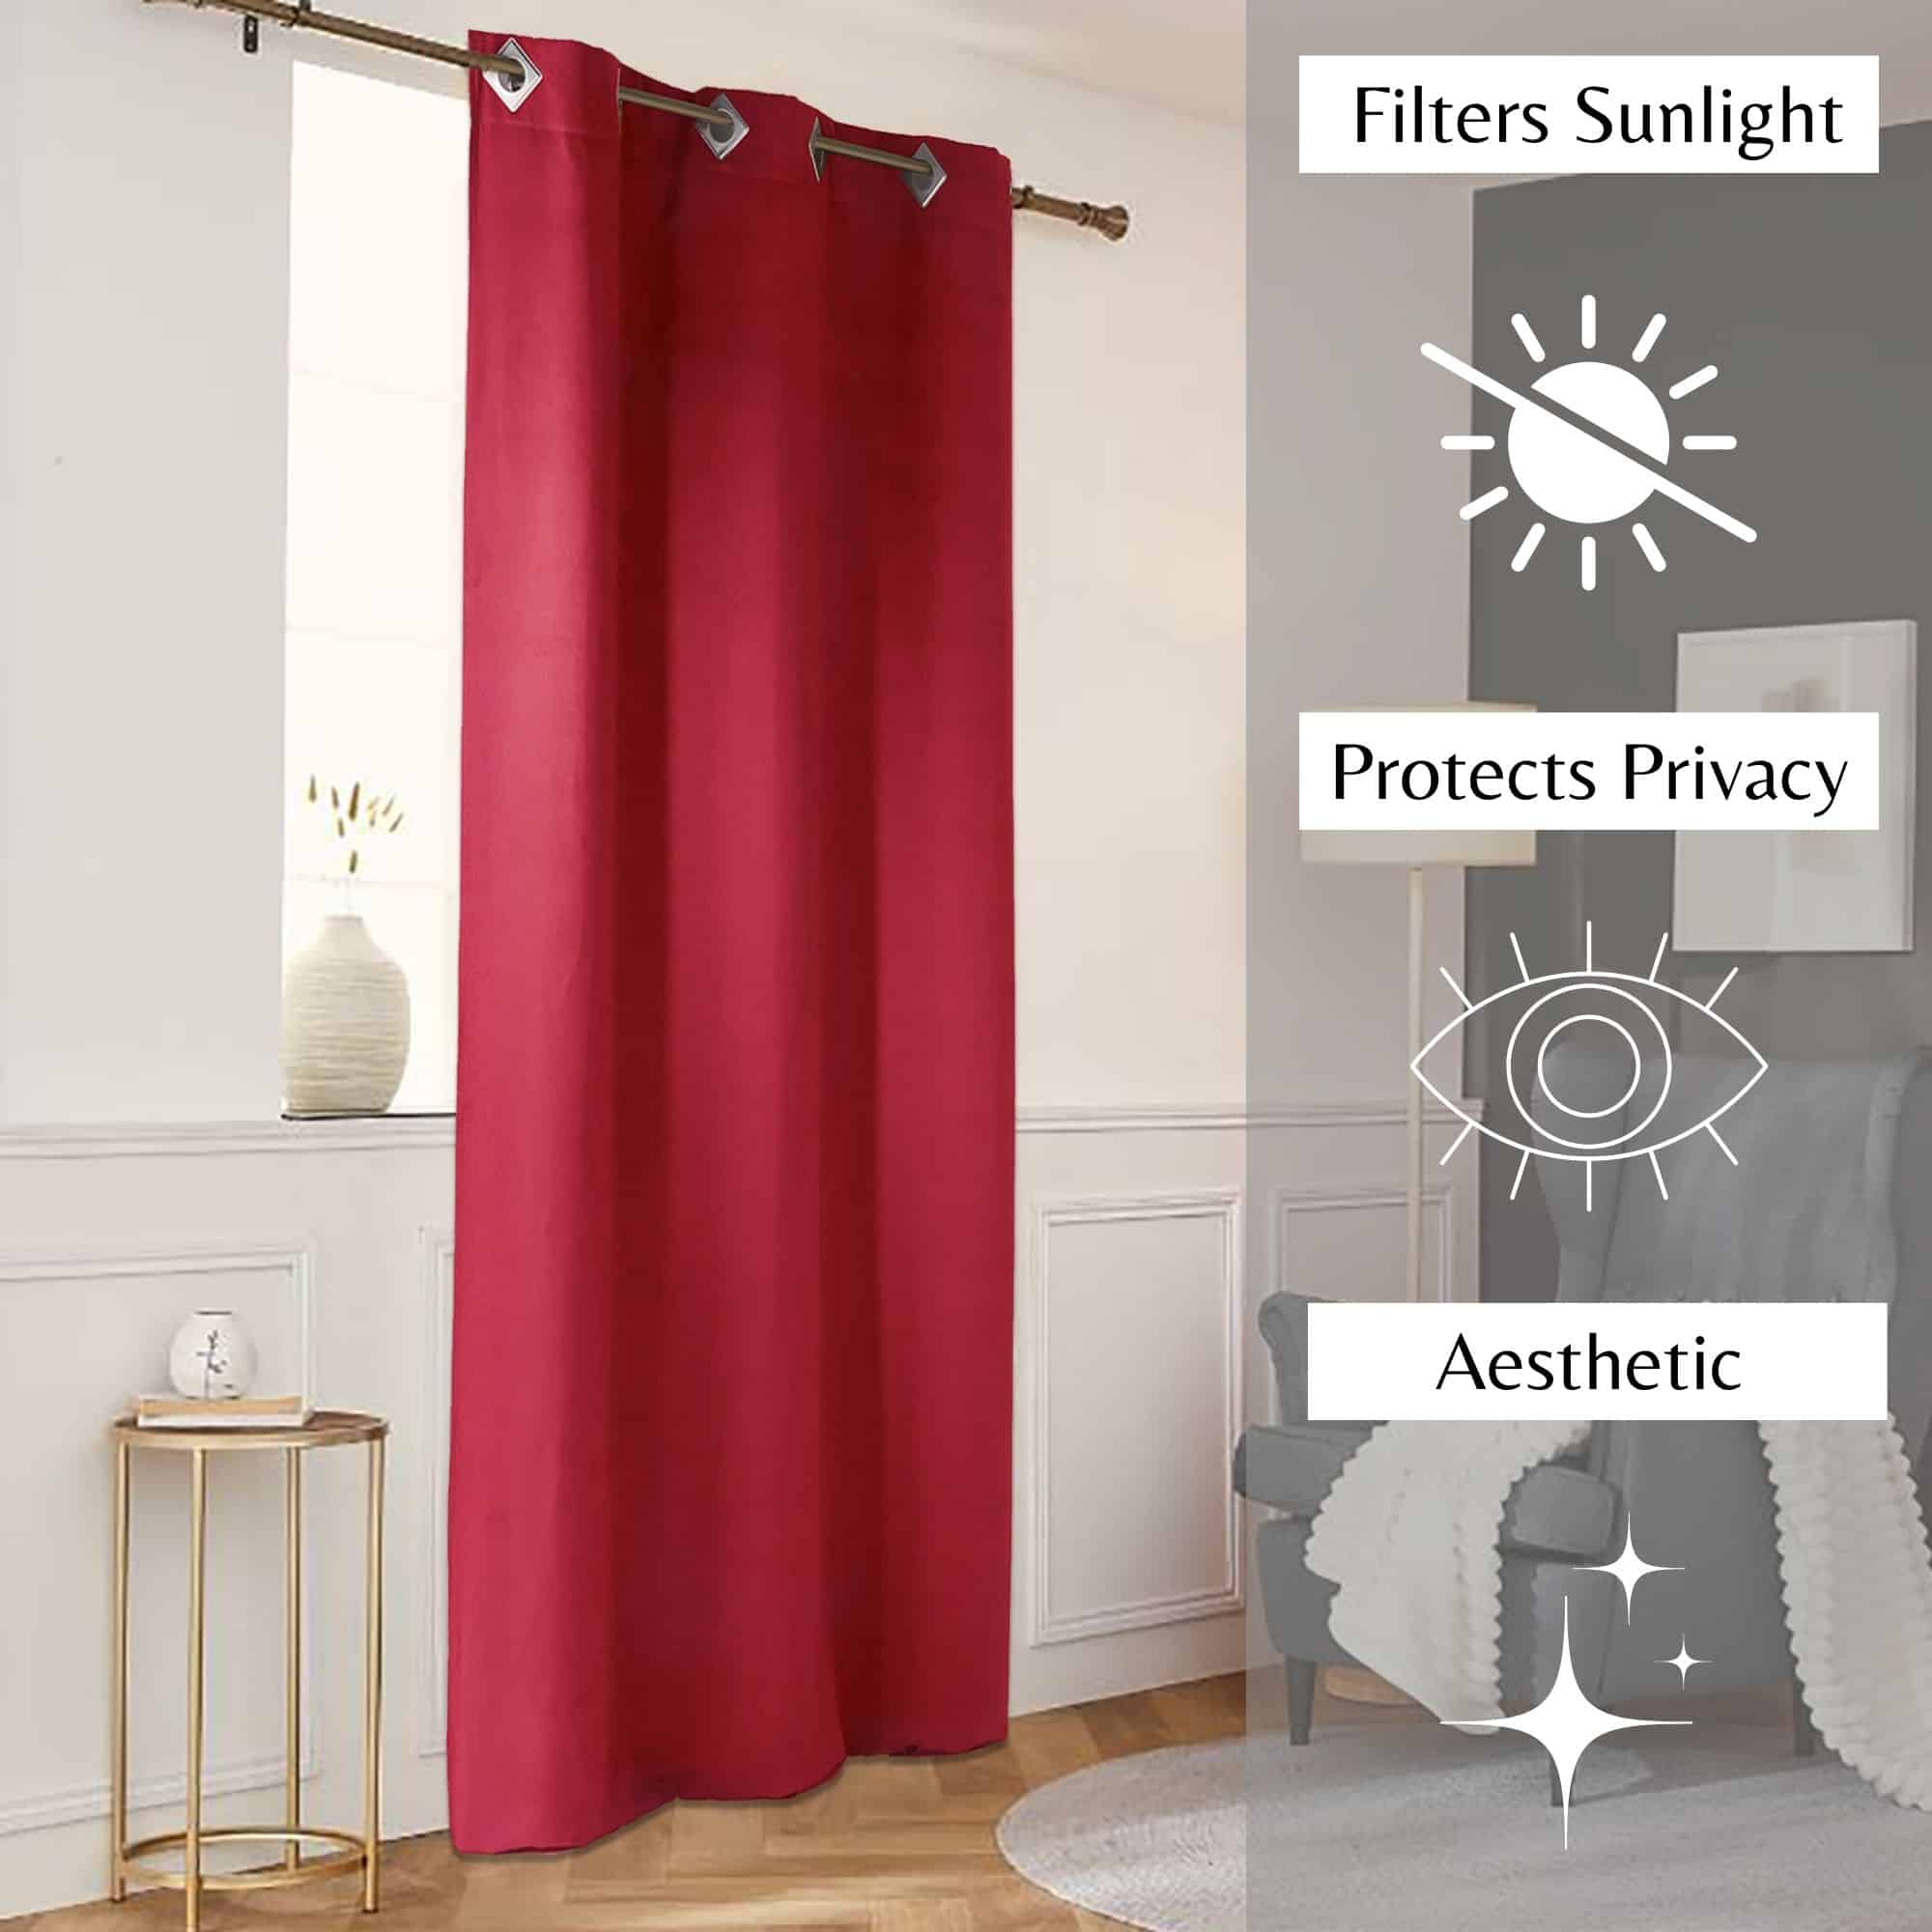 filters sunlight protects privacy aesthetic intense red curtain panel for modern interior 1 piece